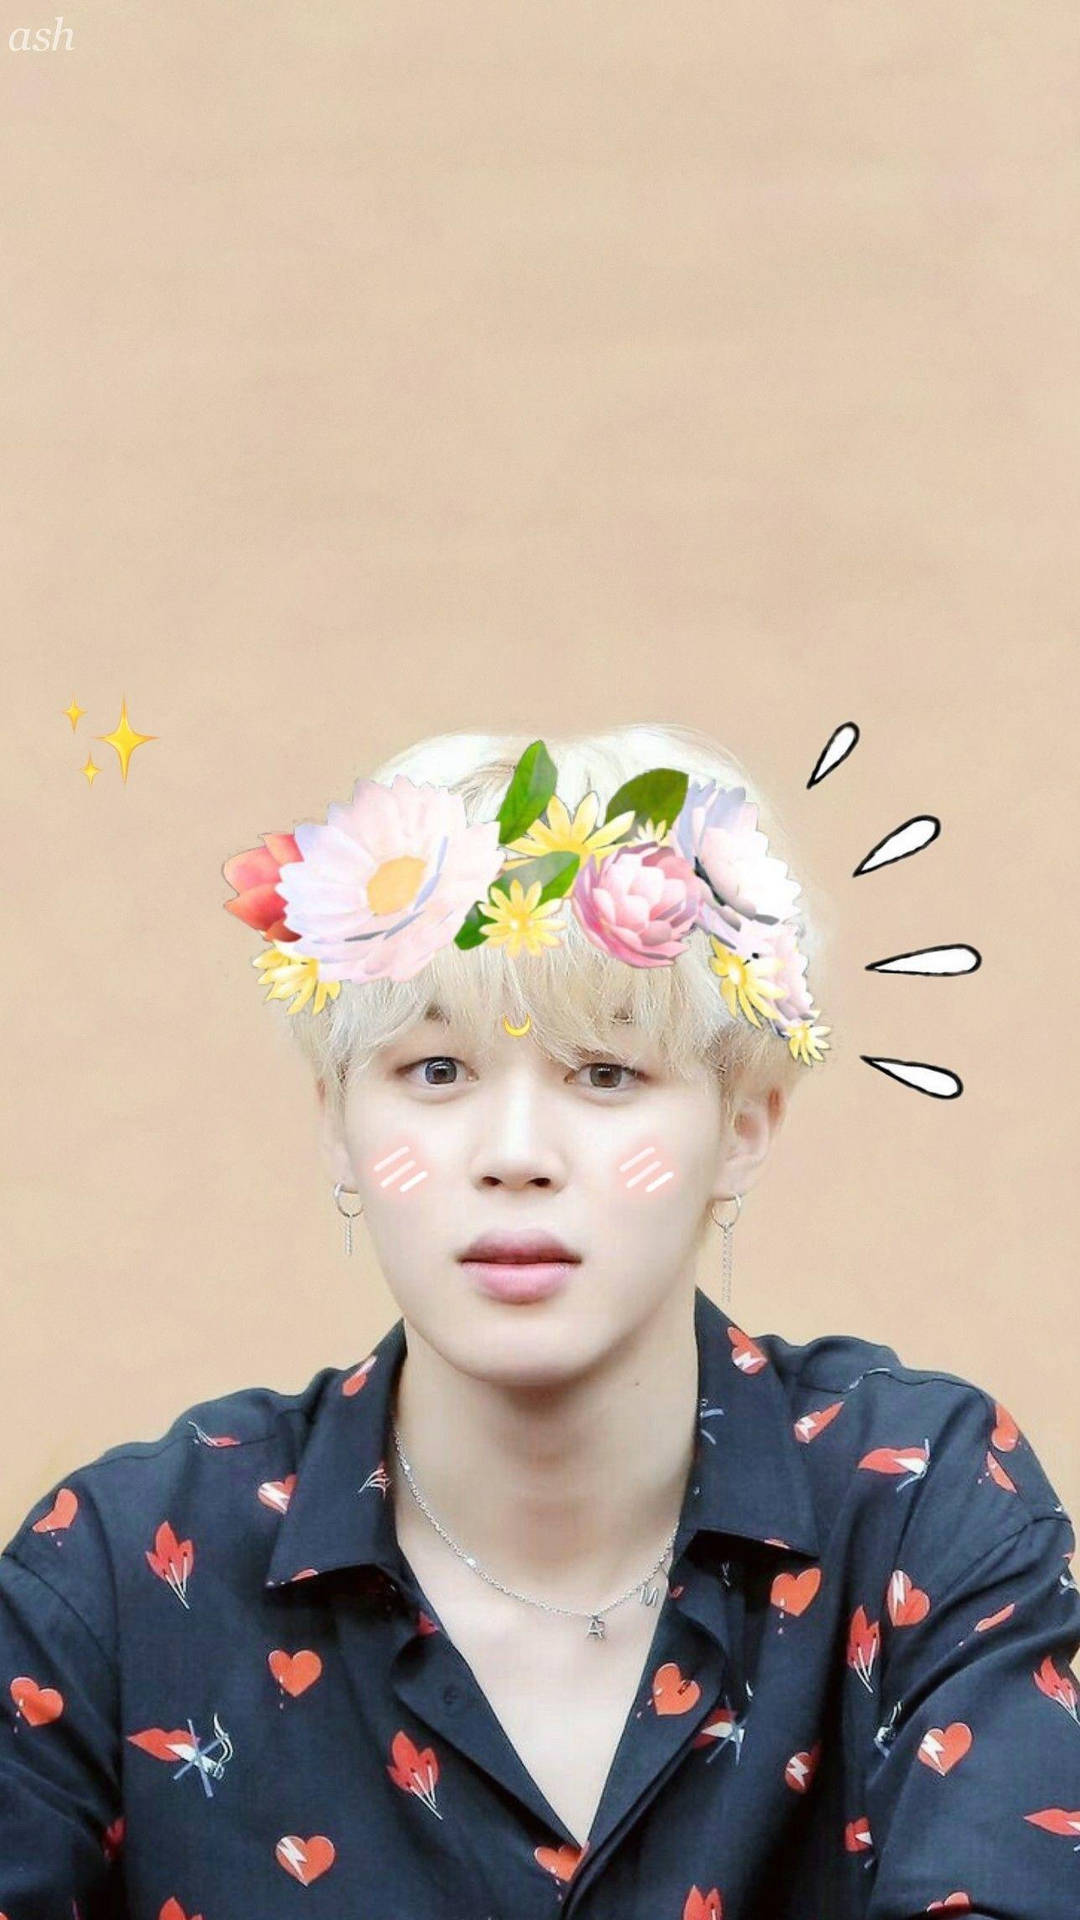 Jimin Bts Cutely Surprised Picture